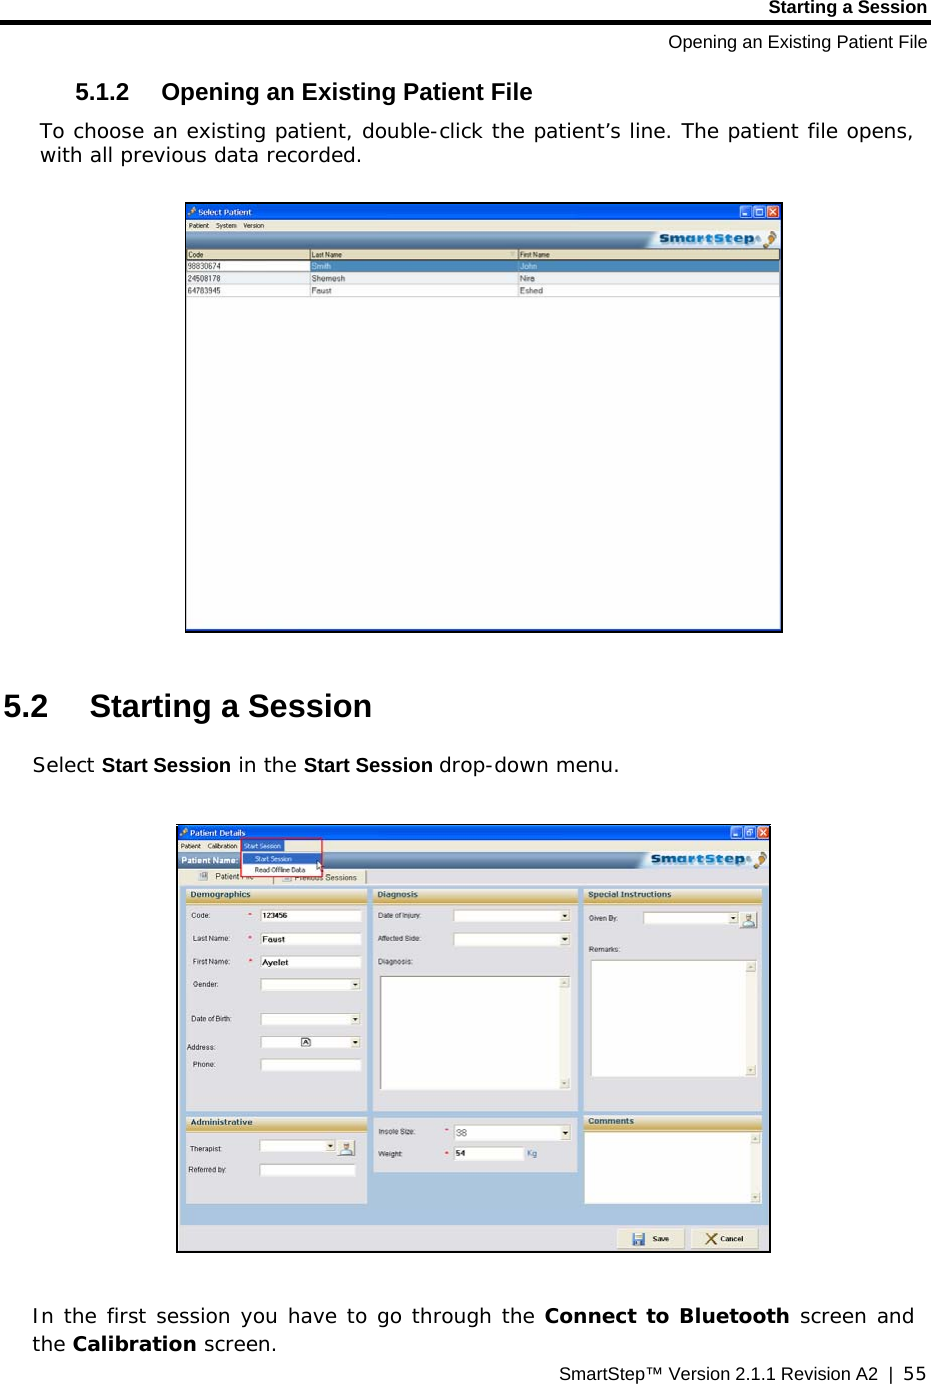 Starting a Session Opening an Existing Patient File SmartStep™ Version 2.1.1 Revision A2  |  55  5.1.2  Opening an Existing Patient File To choose an existing patient, double-click the patient’s line. The patient file opens, with all previous data recorded.    5.2  Starting a Session Select Start Session in the Start Session drop-down menu.    In the first session you have to go through the Connect to Bluetooth screen and the Calibration screen.   